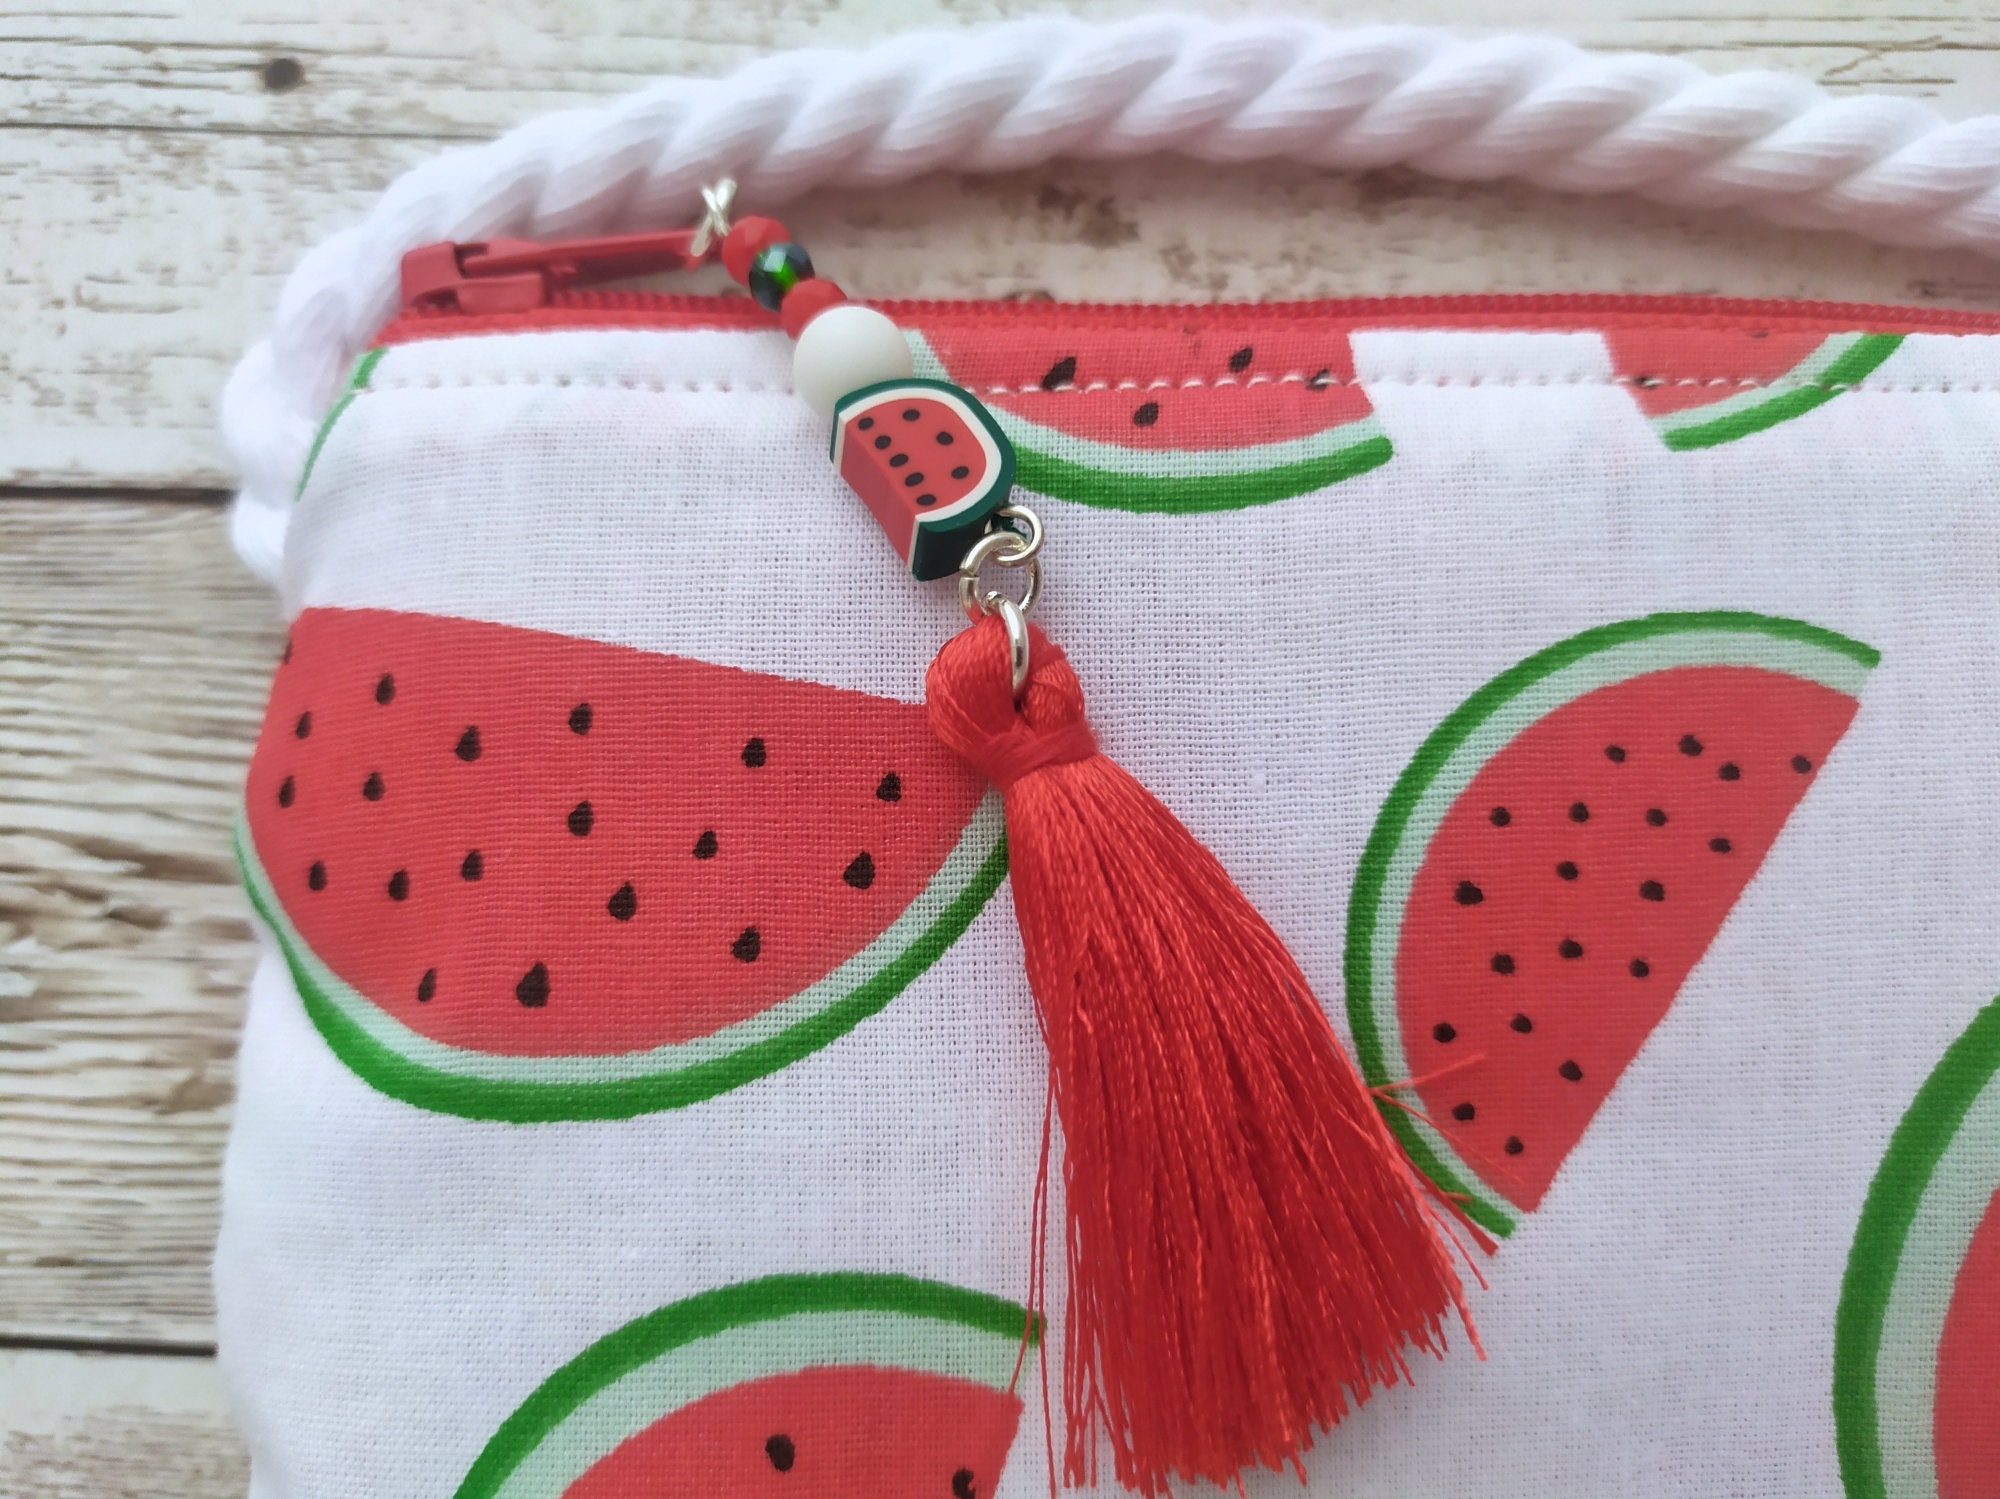 Watermelons Bag for Girls, Kids Summer Accessories - Etsy 日本